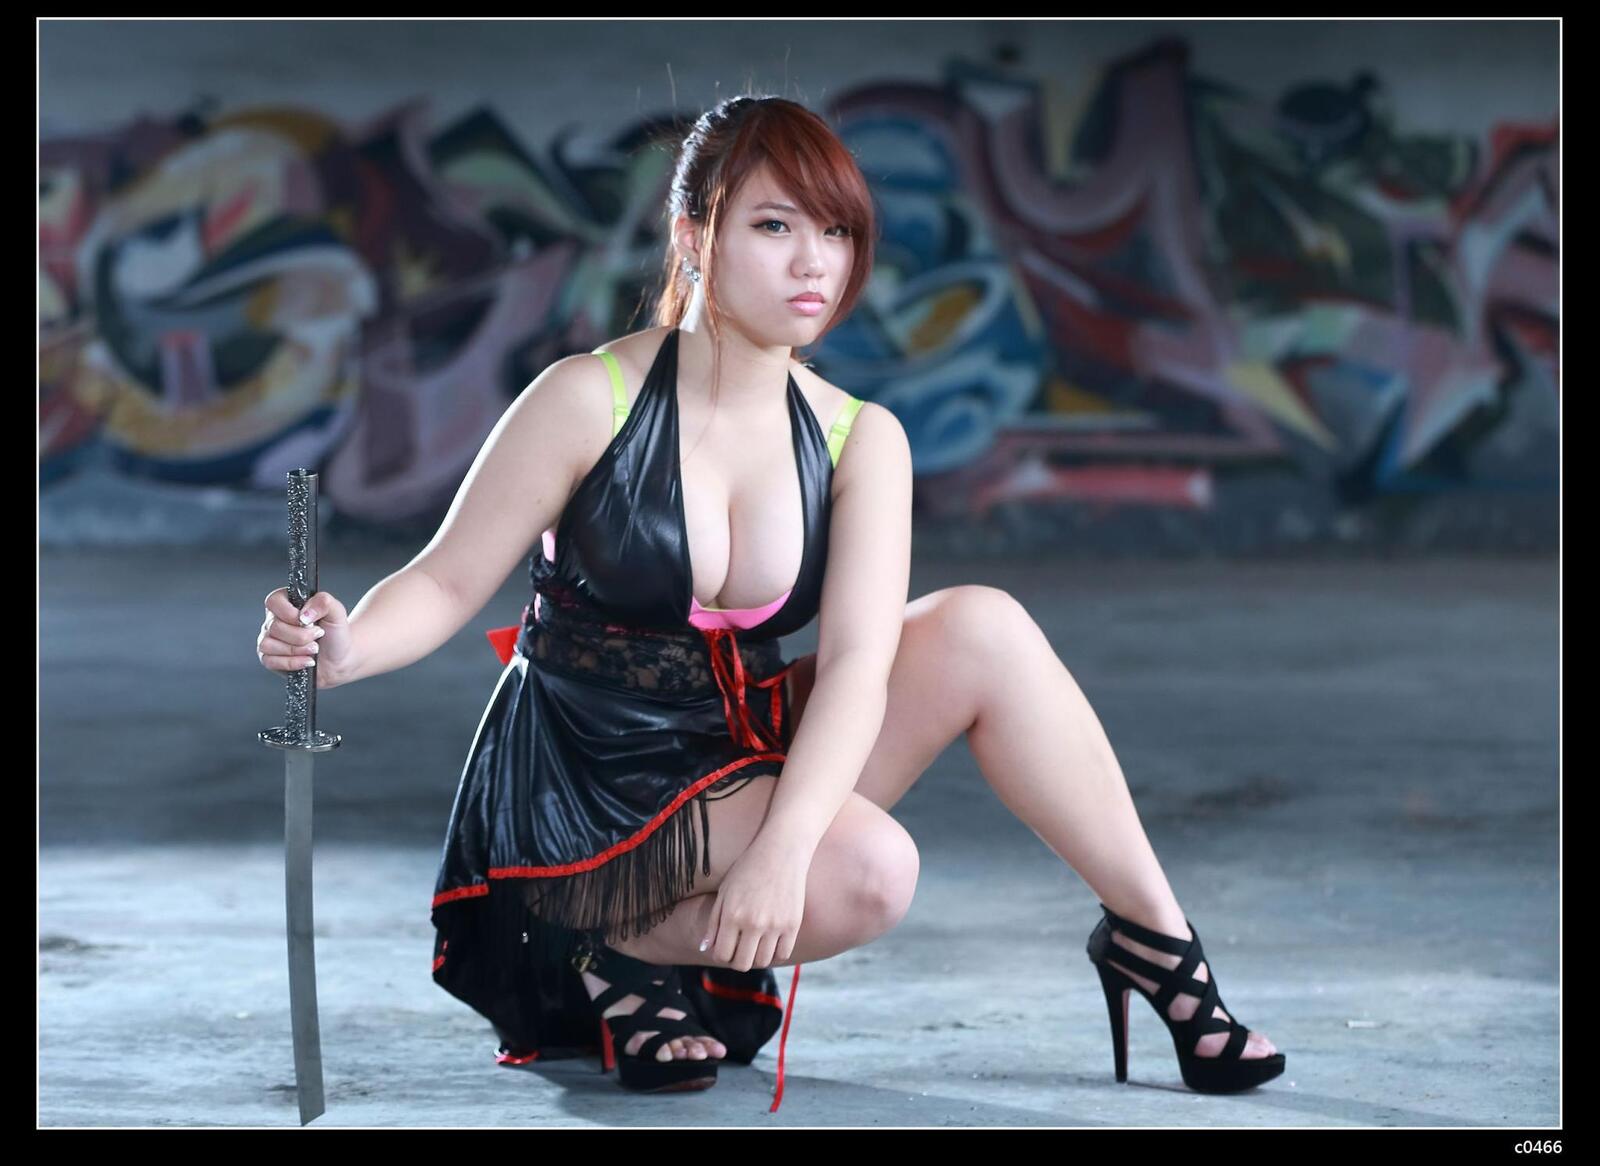 Free photo The girl with the katana in the leather dress